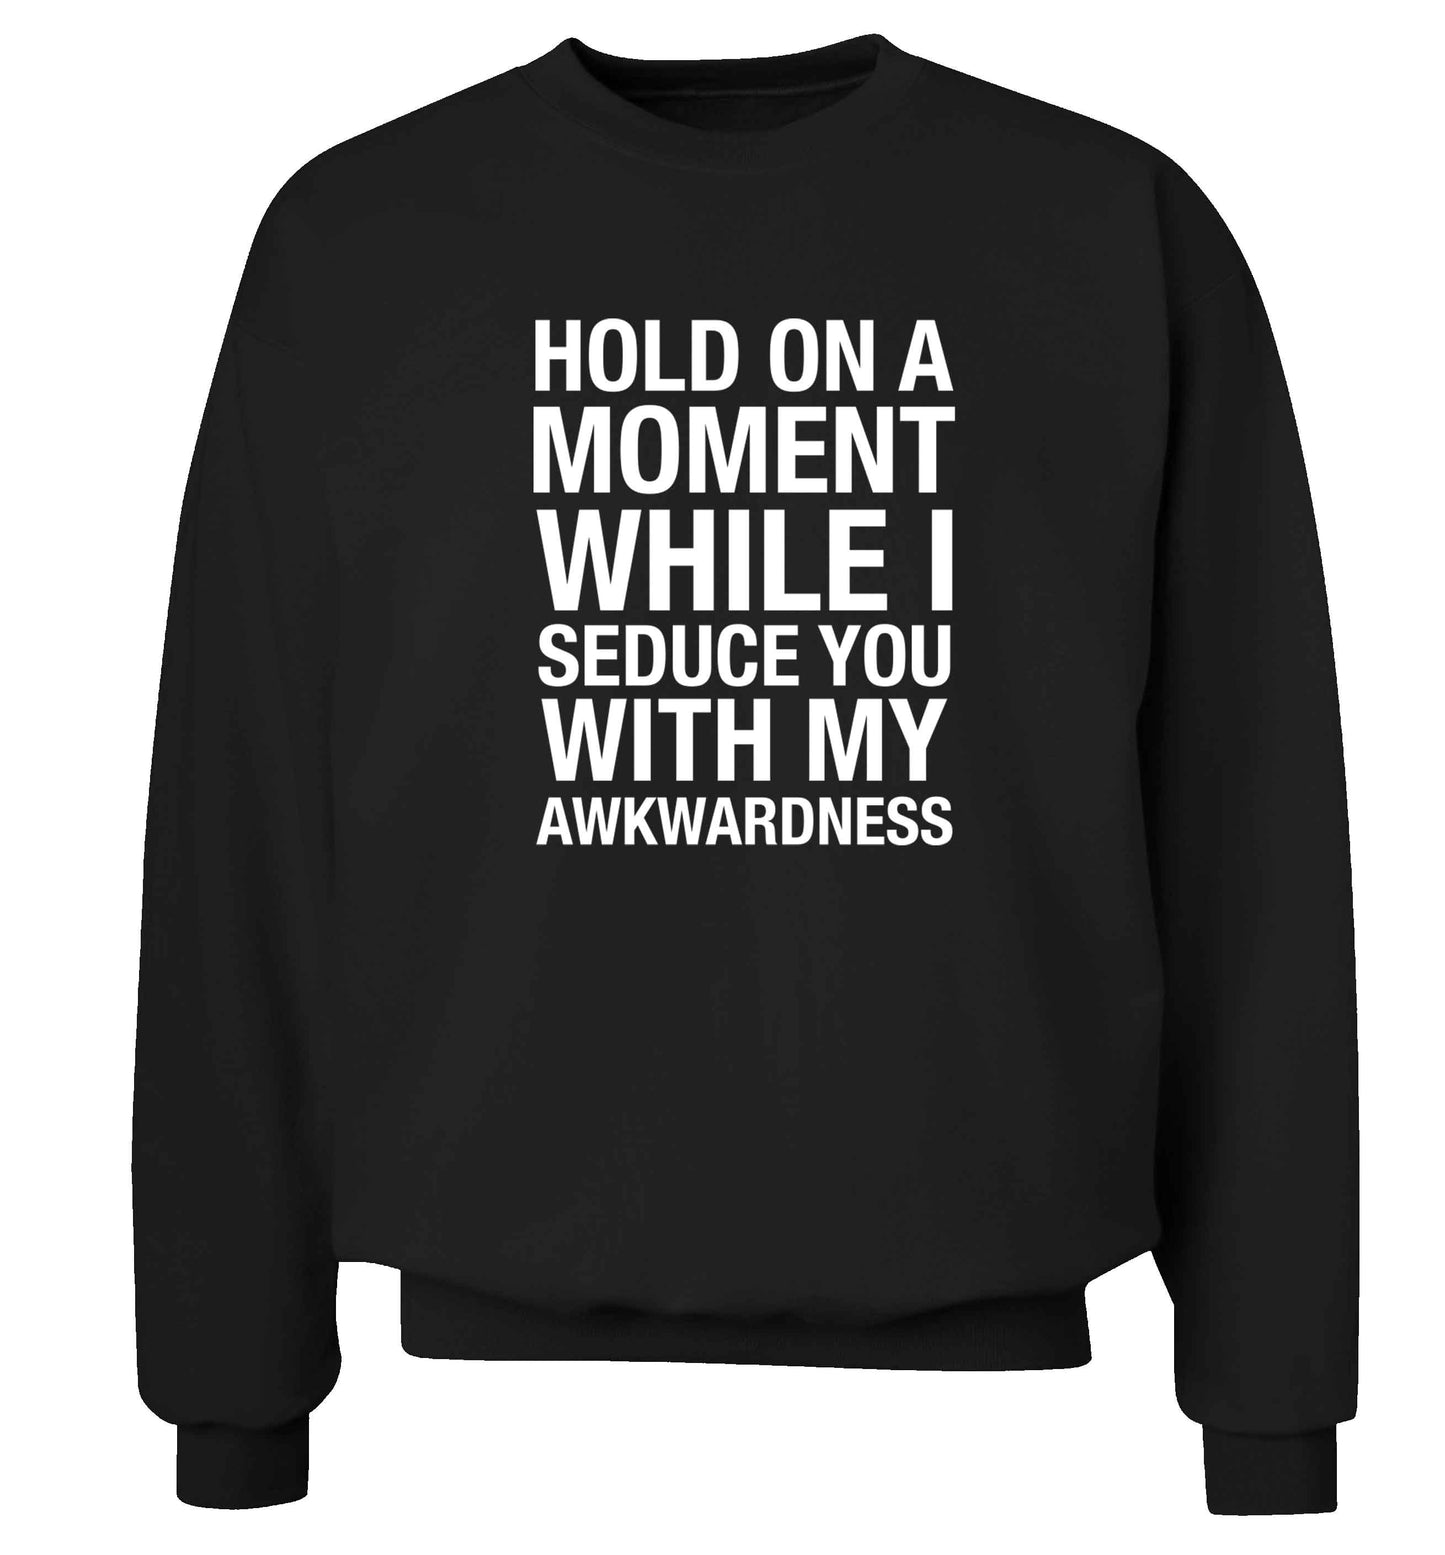 Hold on a moment while I seduce you with my awkwardness adult's unisex black sweater 2XL